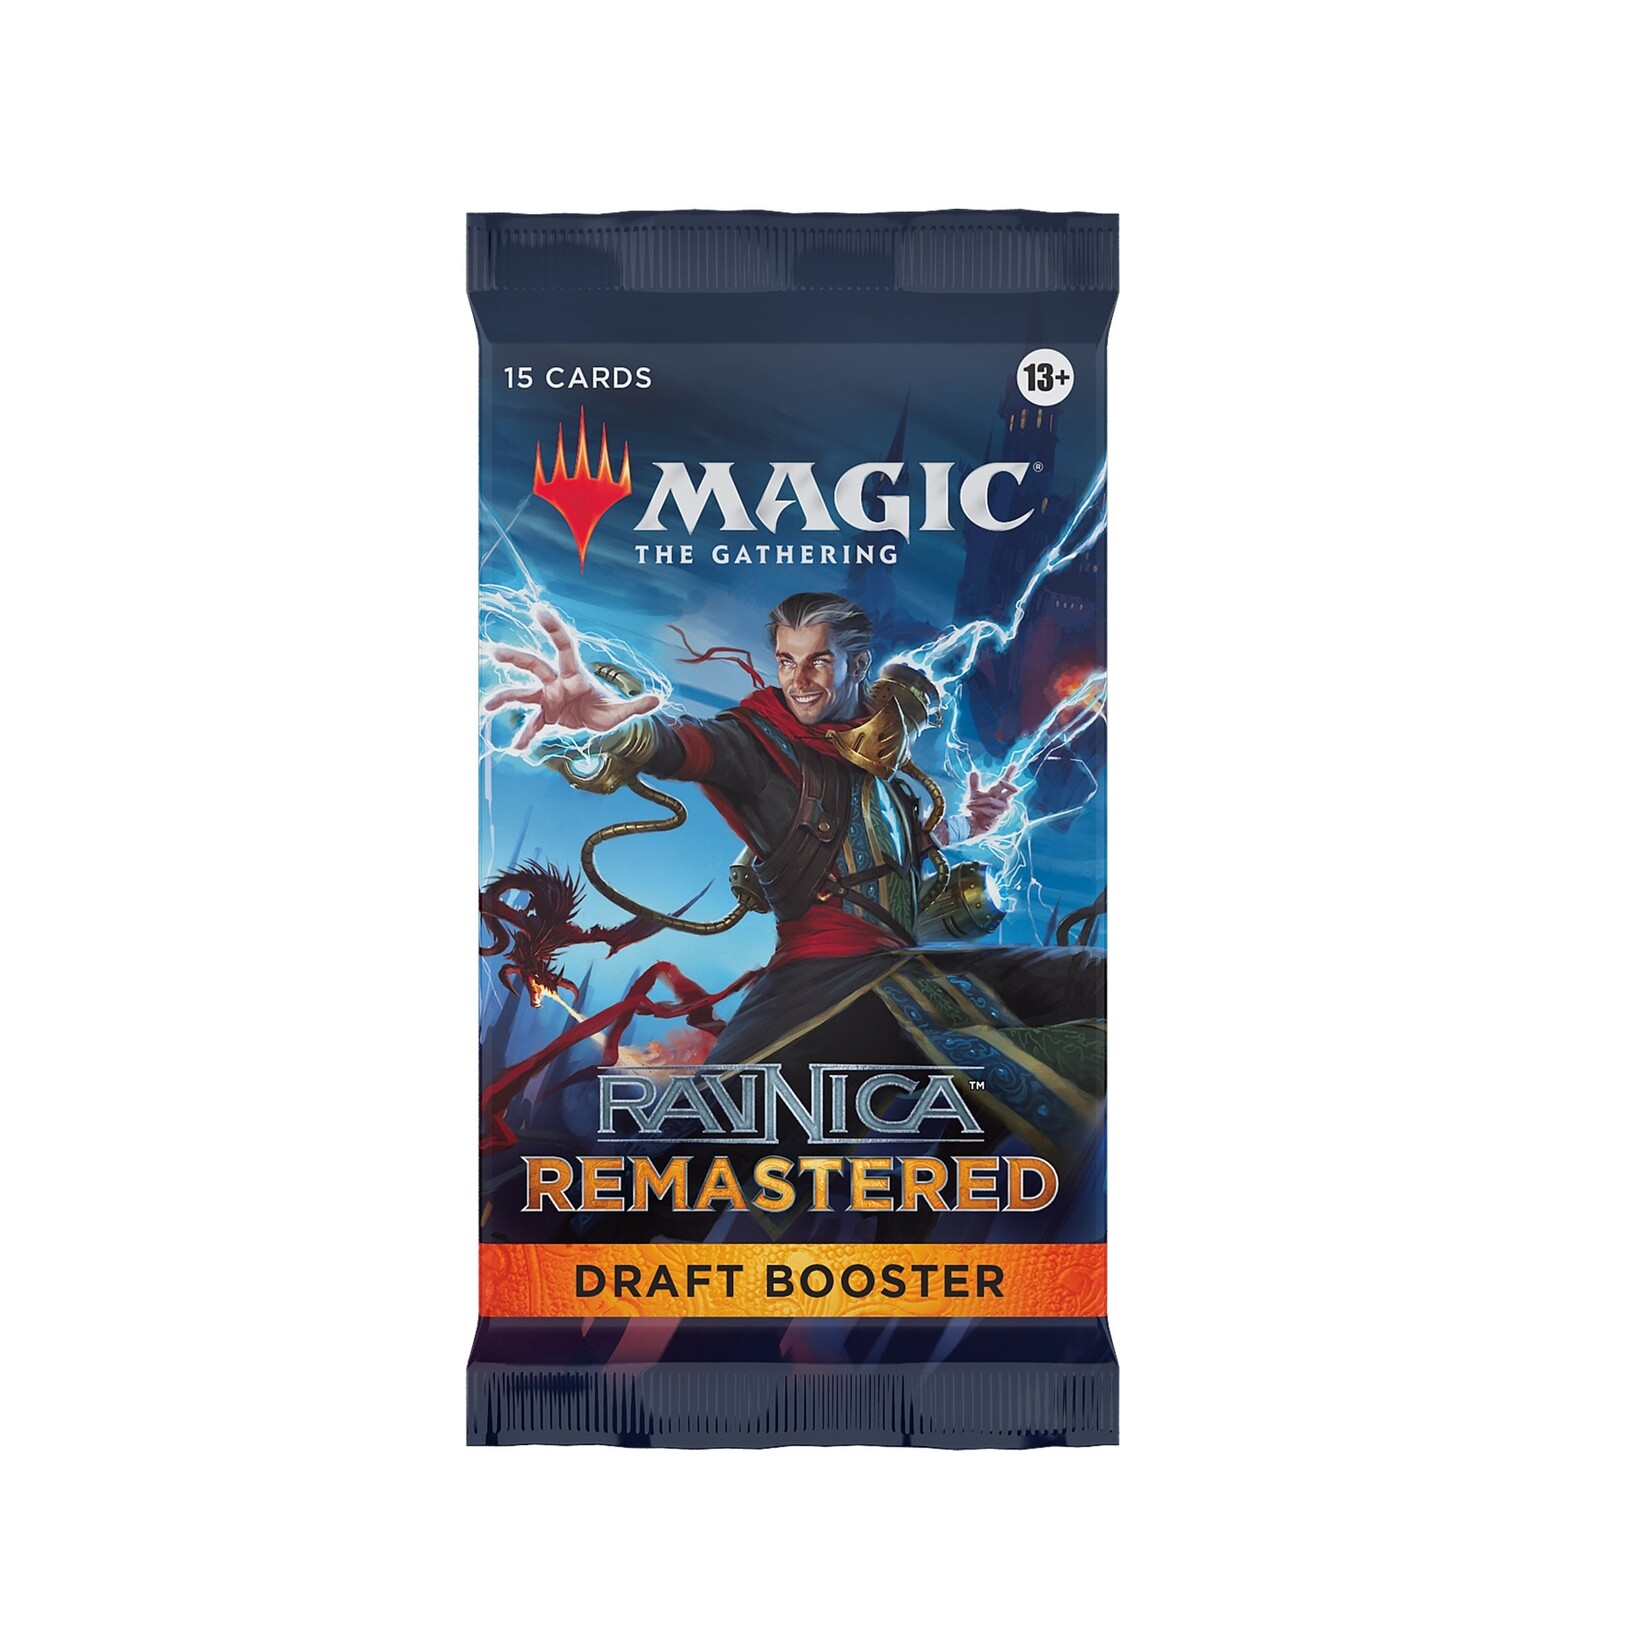 Wizard of the coast Magic the gathering - Ravnica remastered - Draft  booster